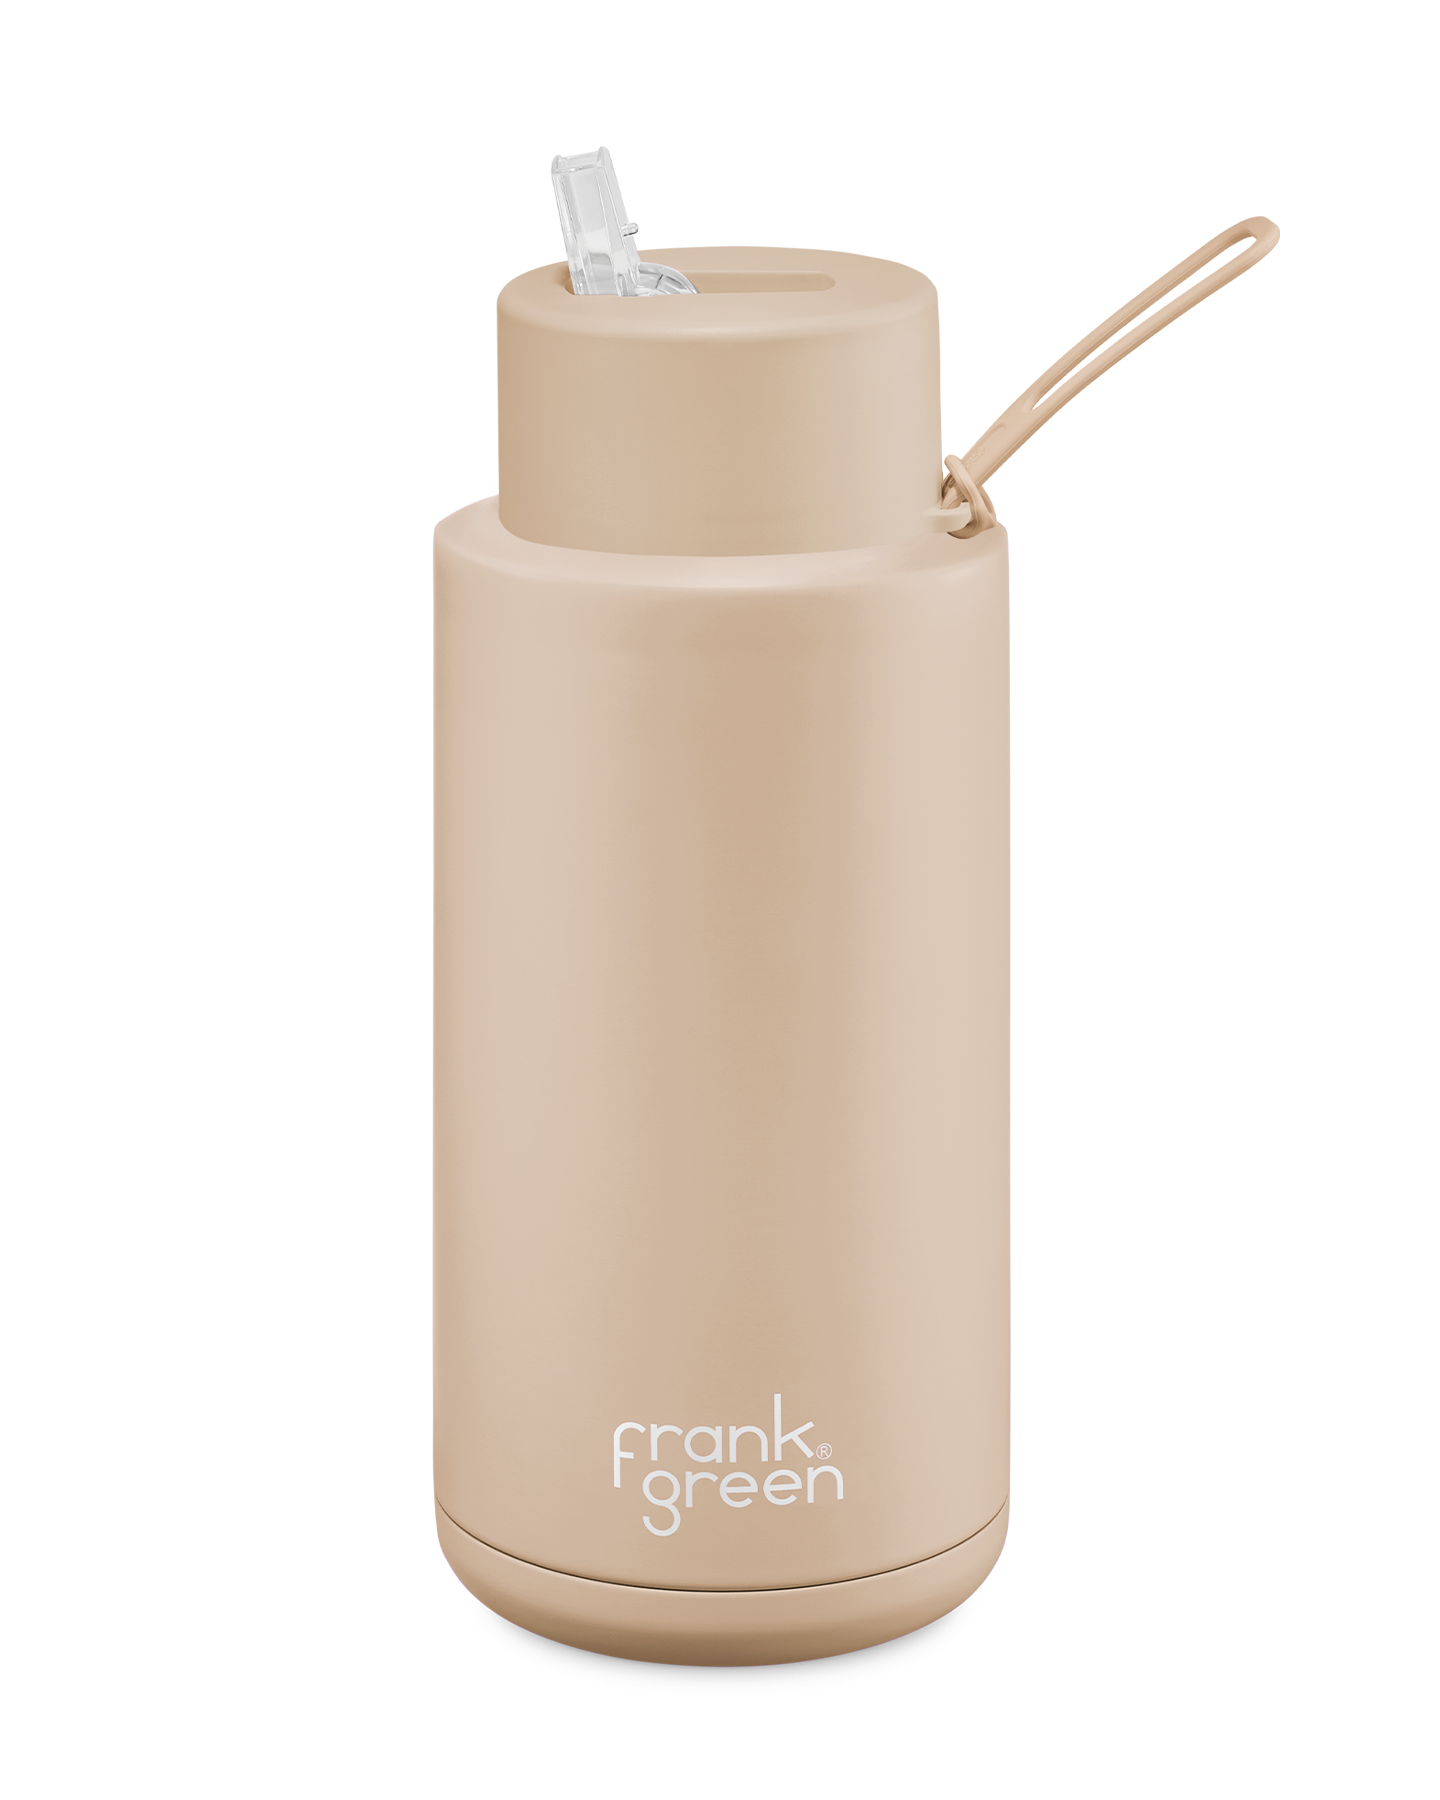 FRANK GREEN CERAMIC REUSABLE BOTTLE 34oz/1 LITRE WITH STRAW LID - SOFT STONE